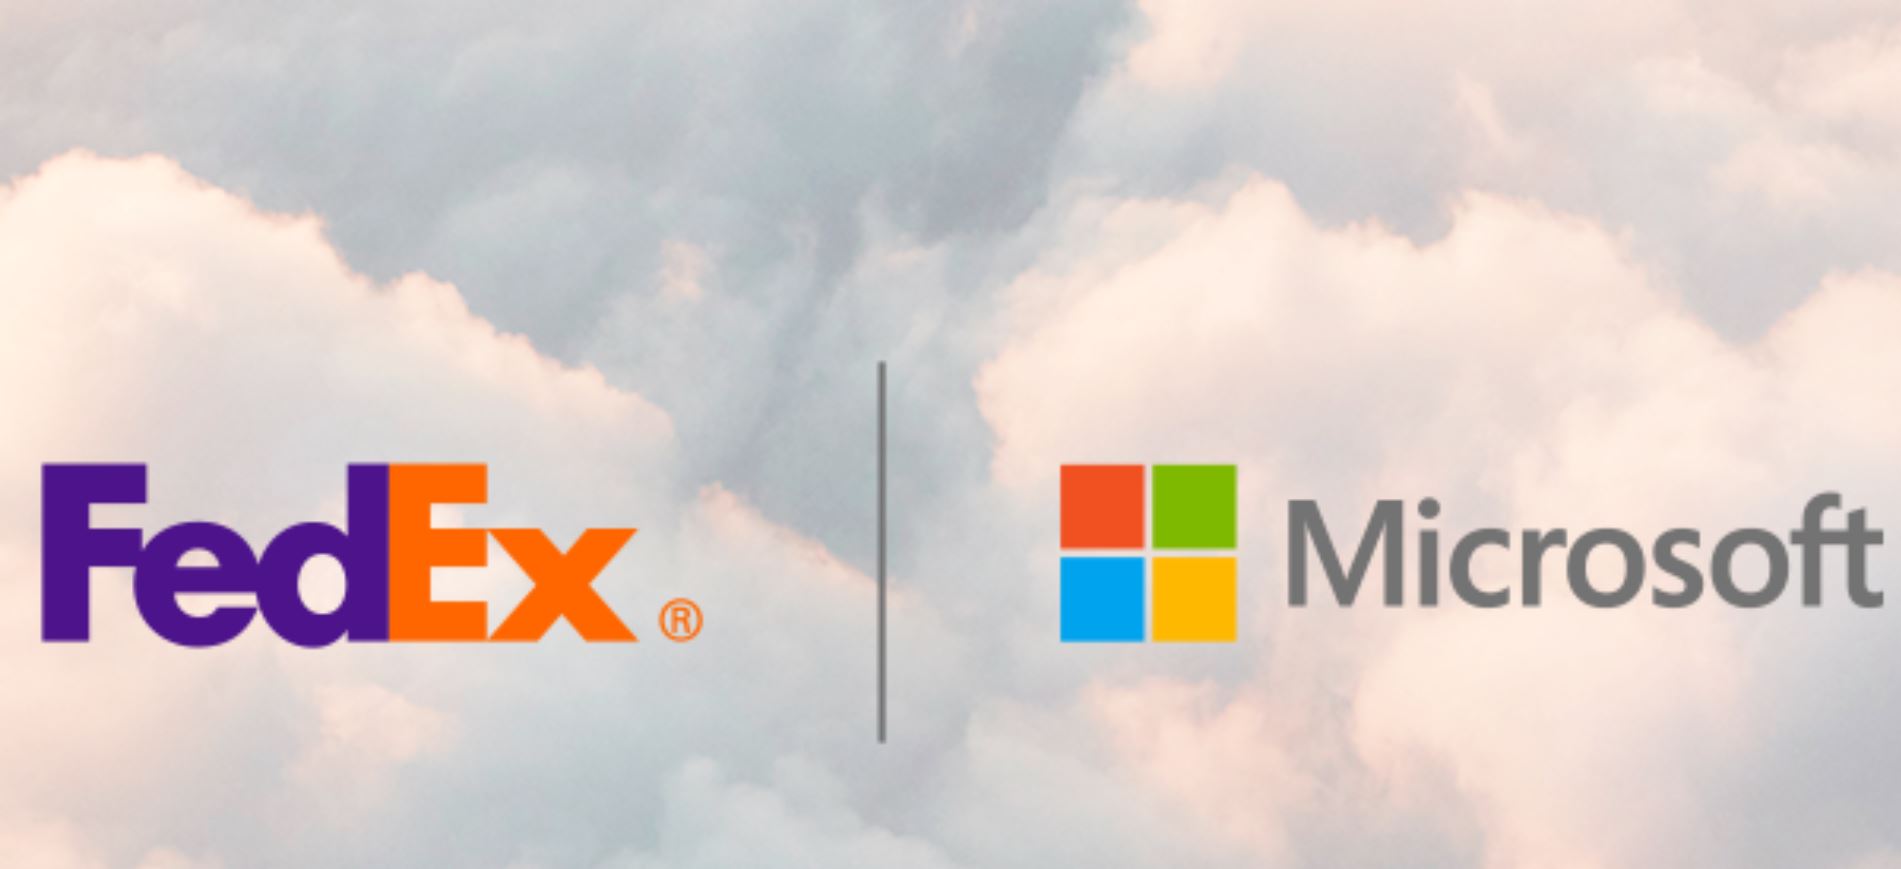 Microsoft and FedEx announce a major partnership to reinvent the end-to-end commerce experience